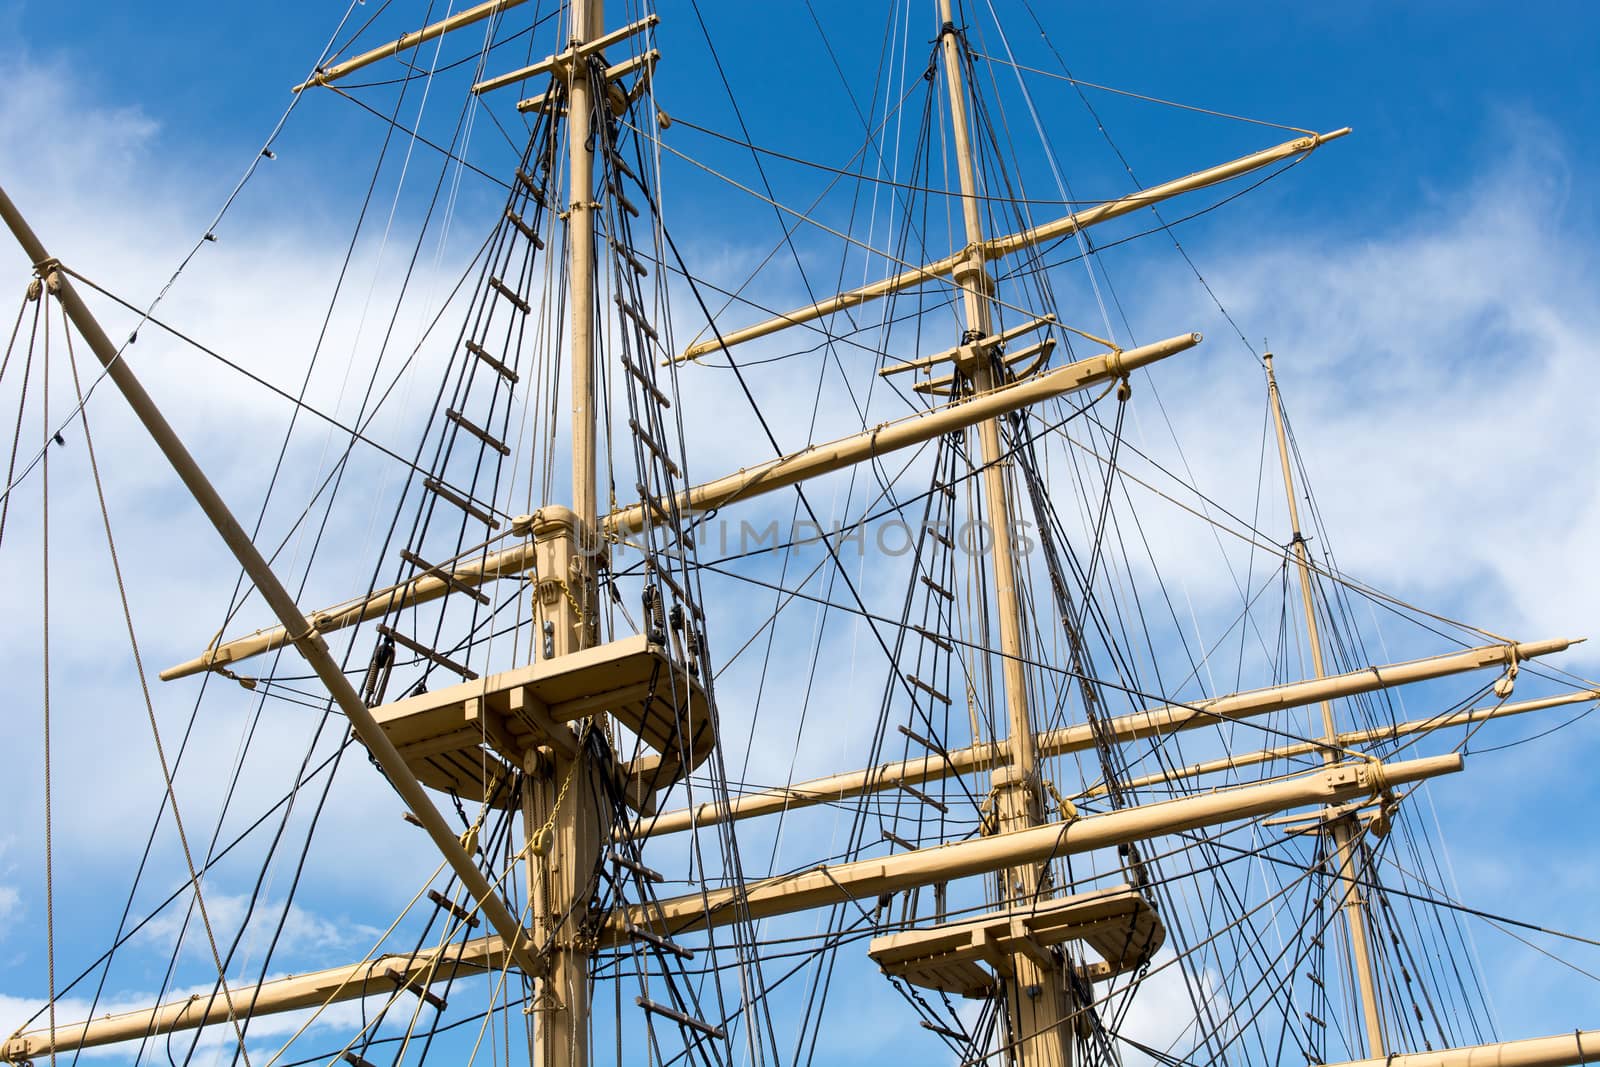 Masts and rigging of a big old sailing ship in front of a blue sky